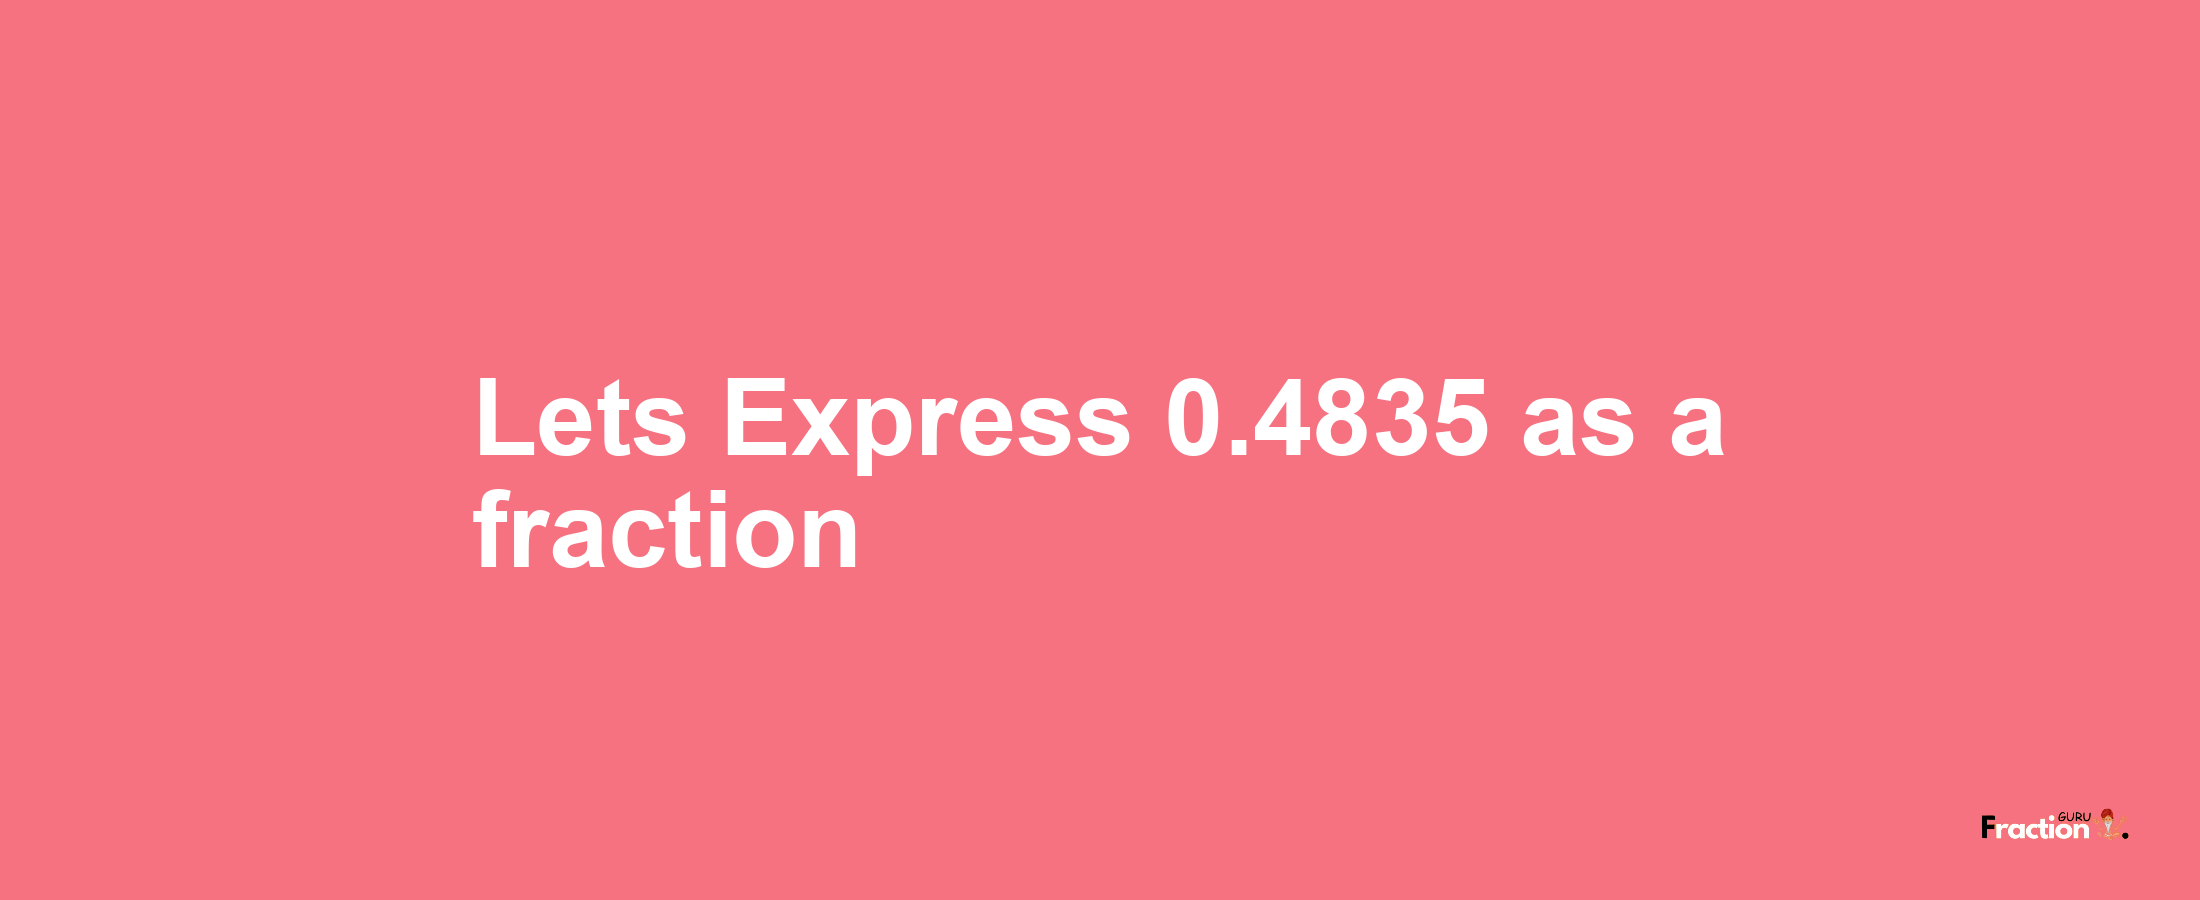 Lets Express 0.4835 as afraction